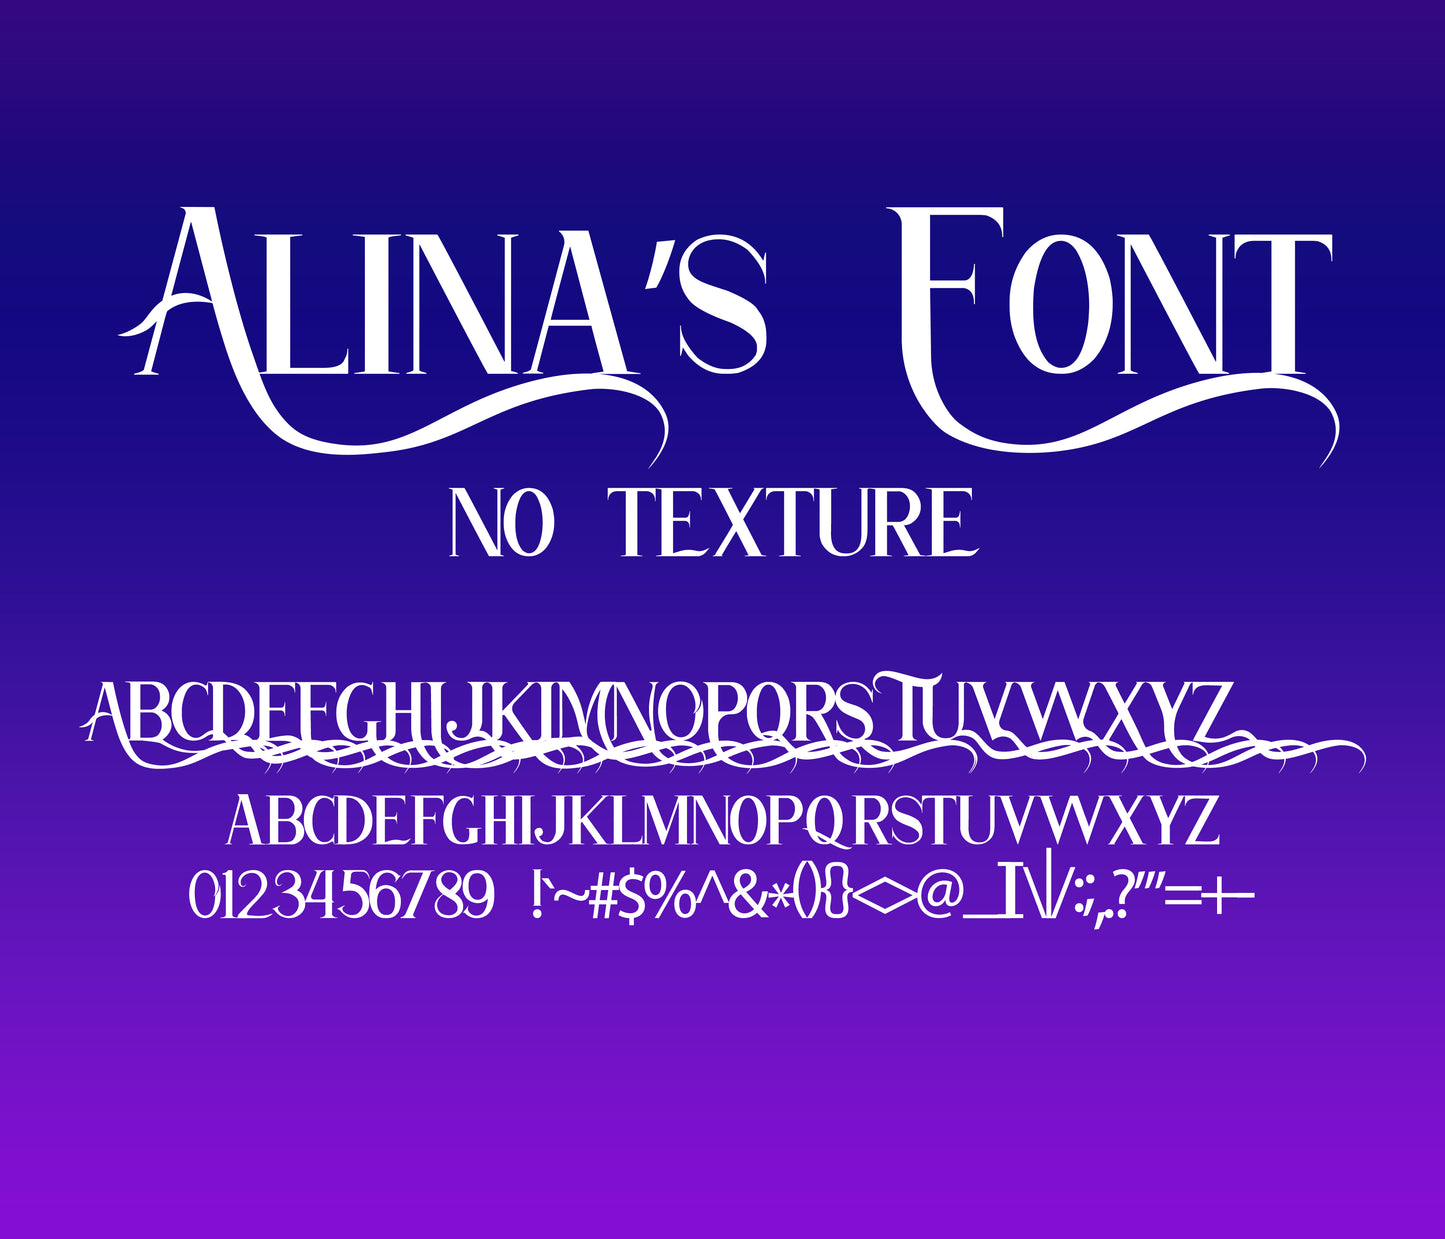 Little Mermaid Waves: Alina's Textured Font for Sea-Inspired Crafts